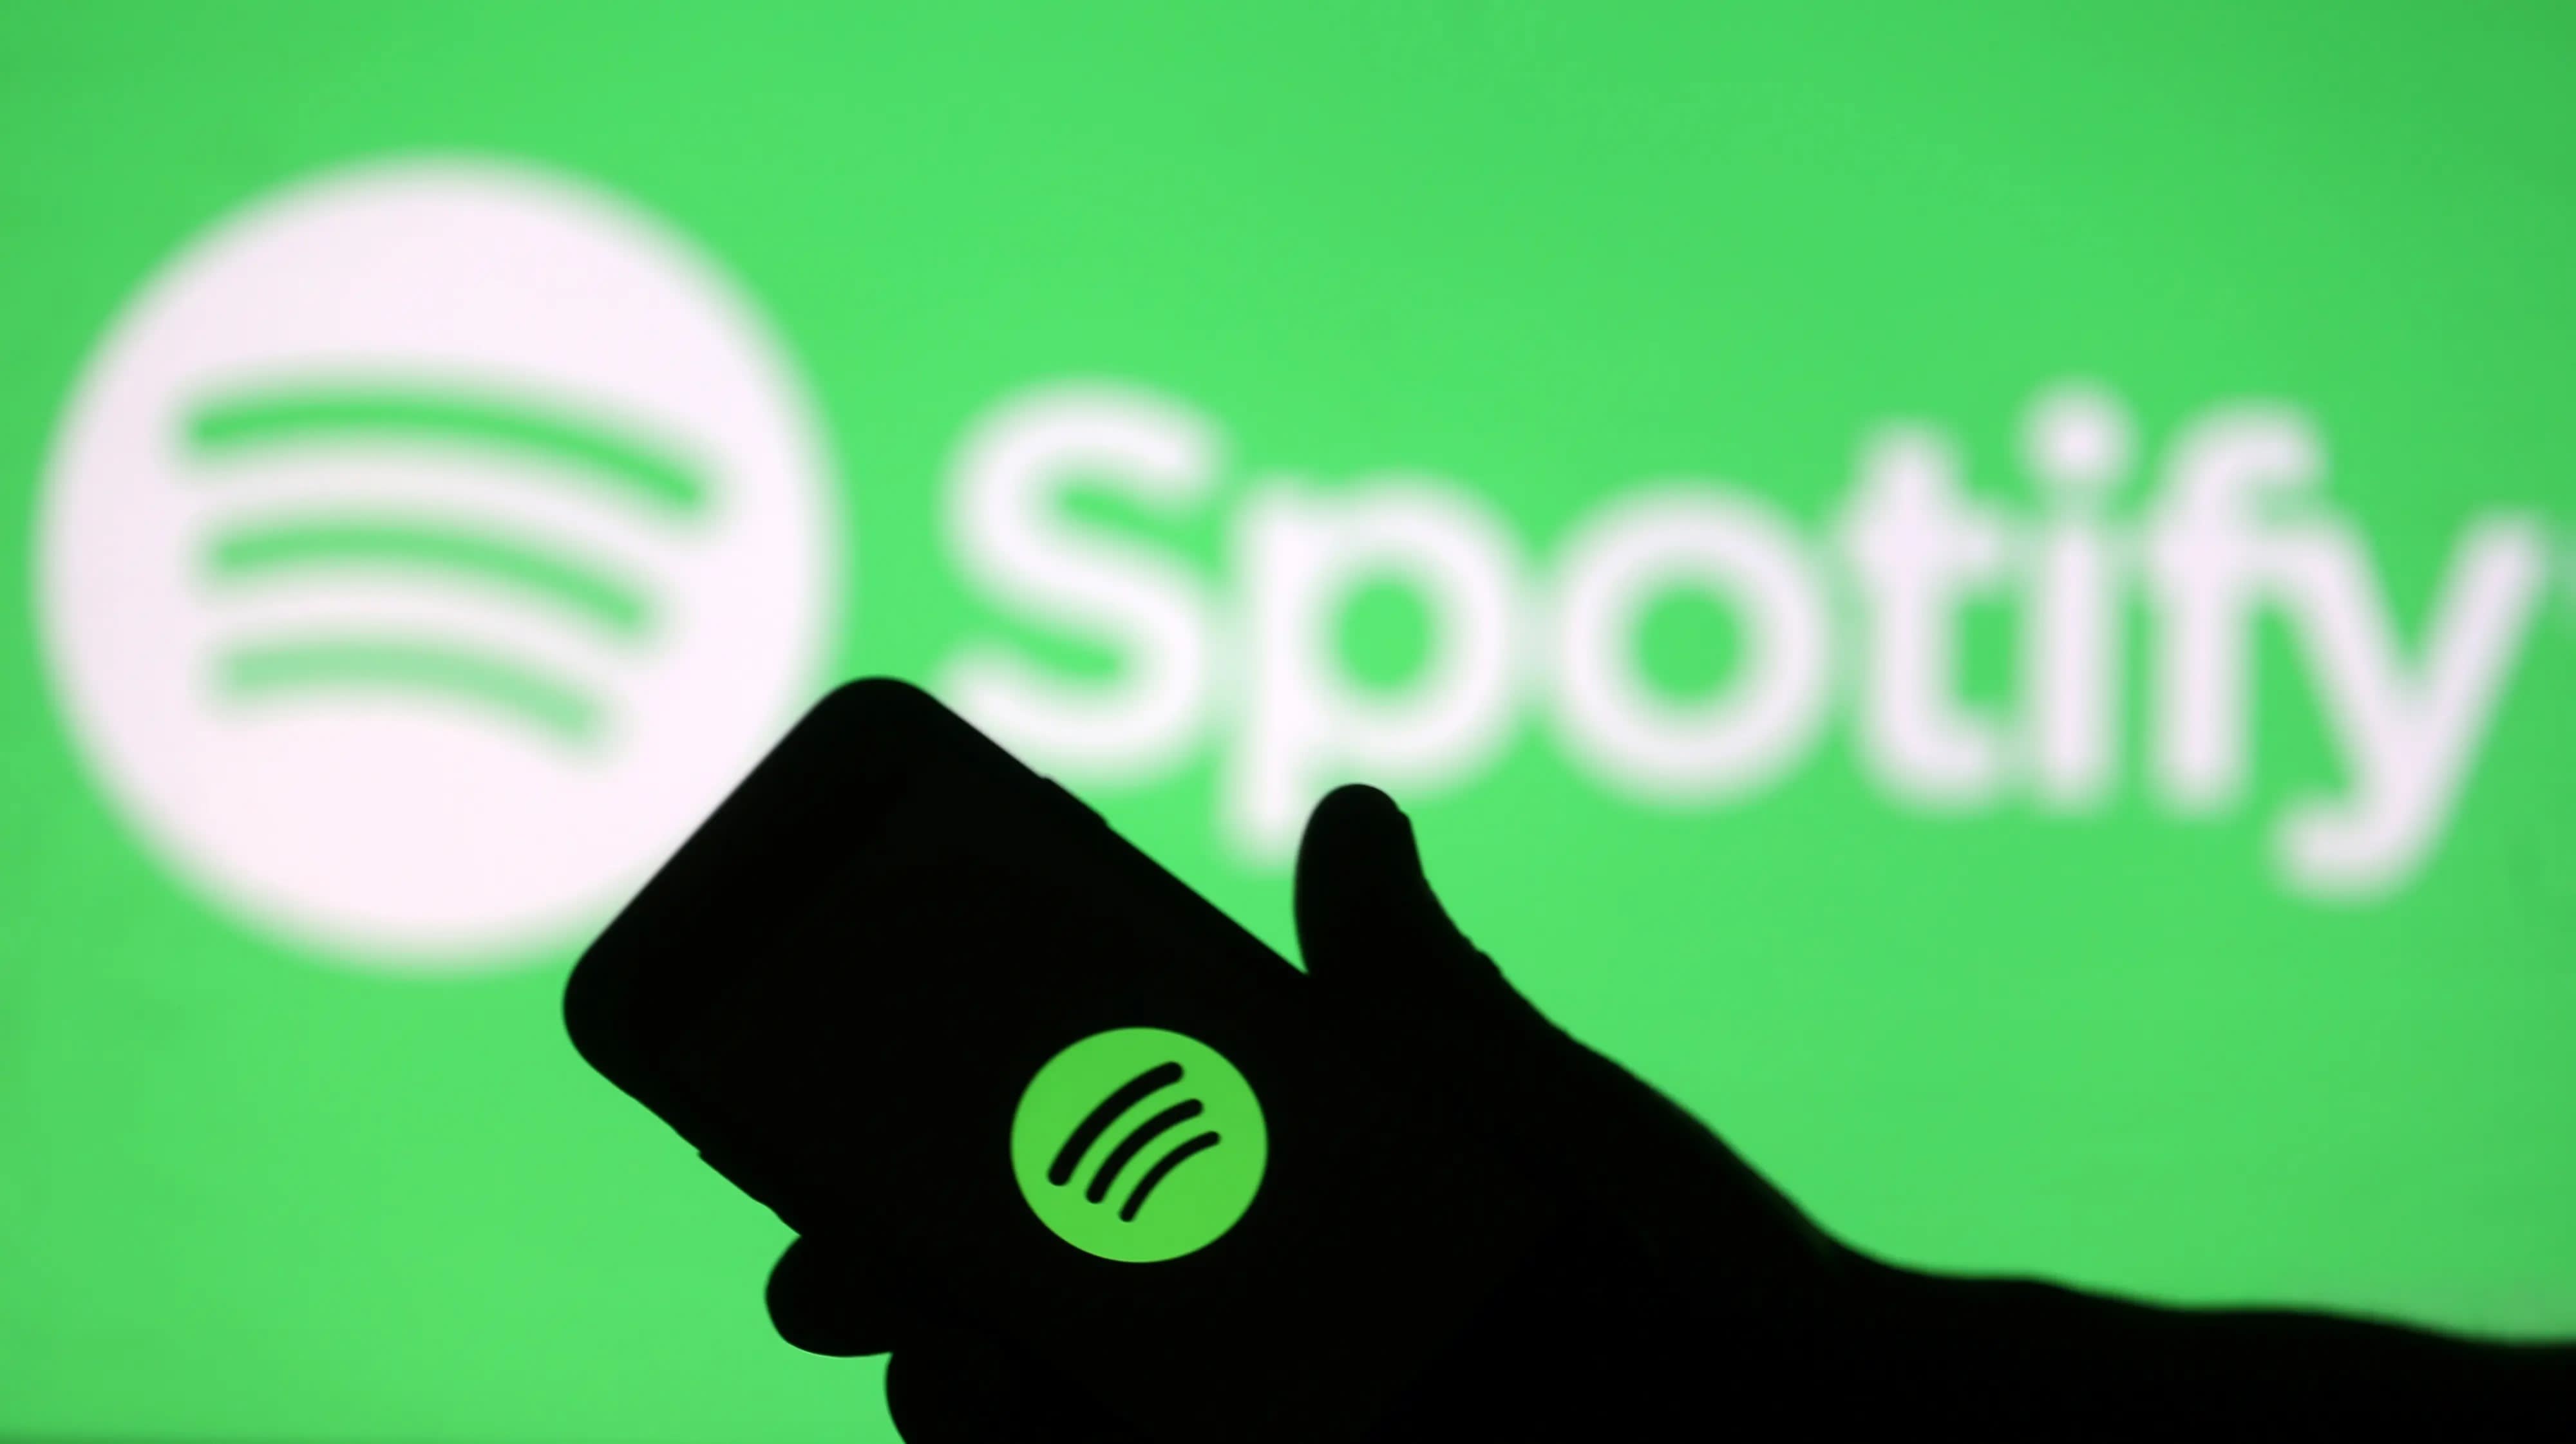 Spotify Now Has 100 Million Paying Subscribers,Up 32% Year-On-Year.